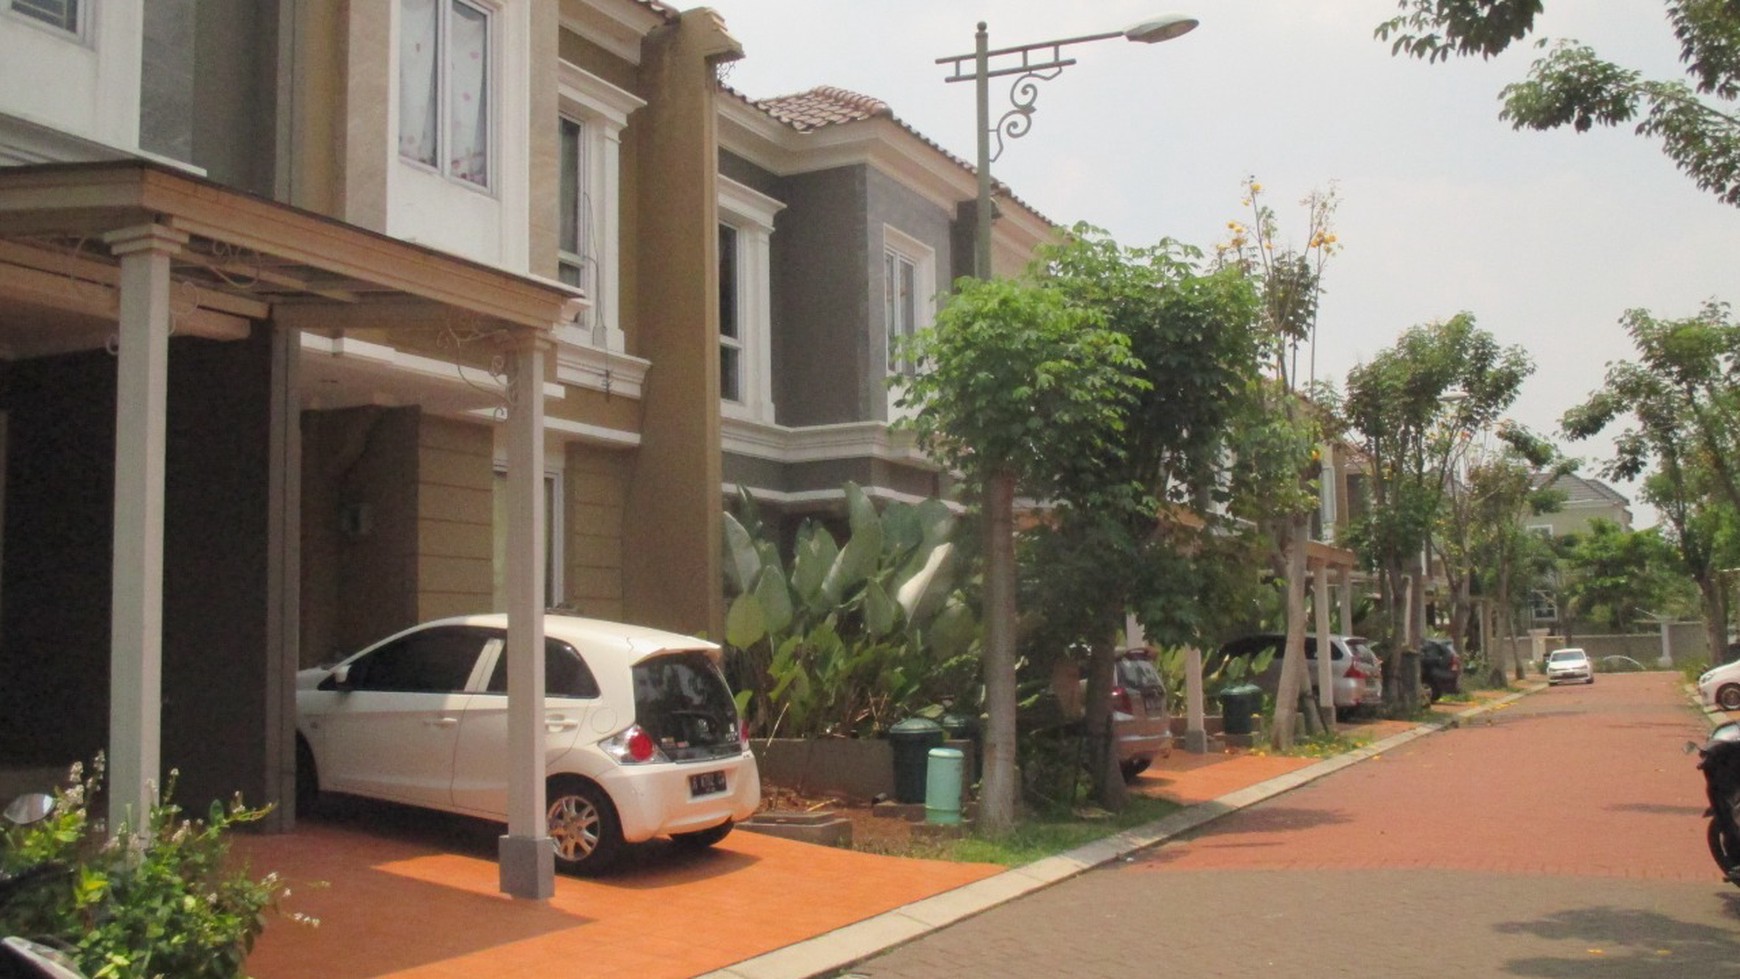 For rent small house Karelia Gading Serpong unfurnished canopy carport